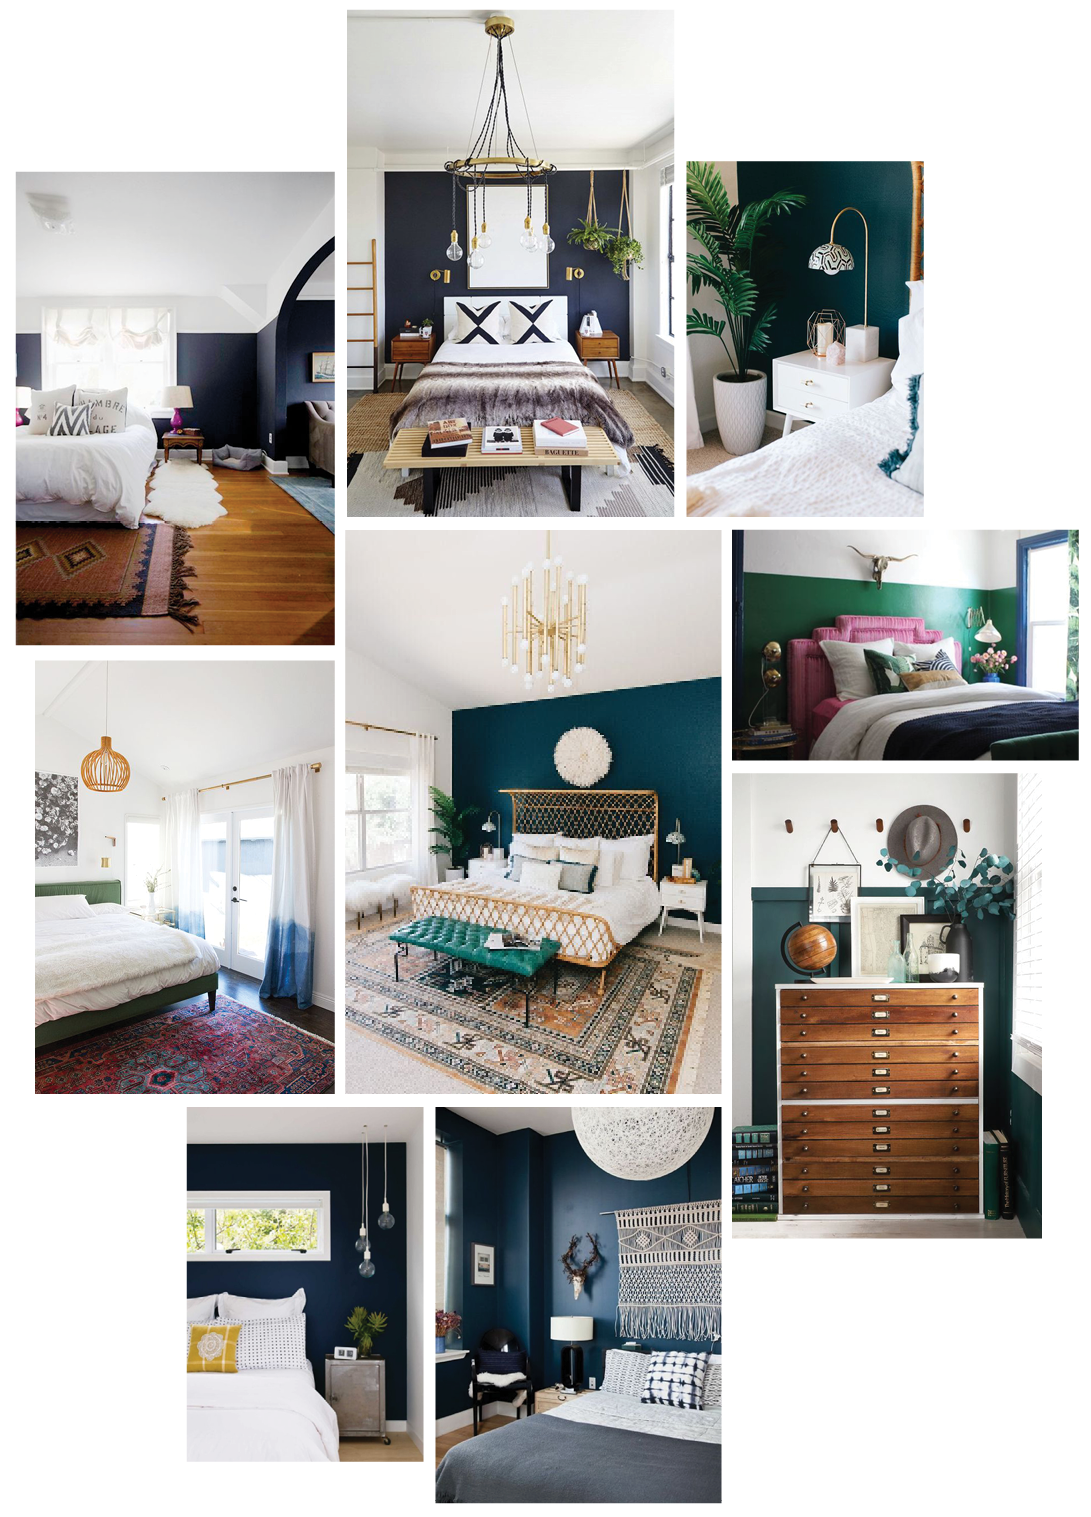 One Room Challenge: Turquoise Guest Room Makeover Coming Soon! /// By Design Fixation